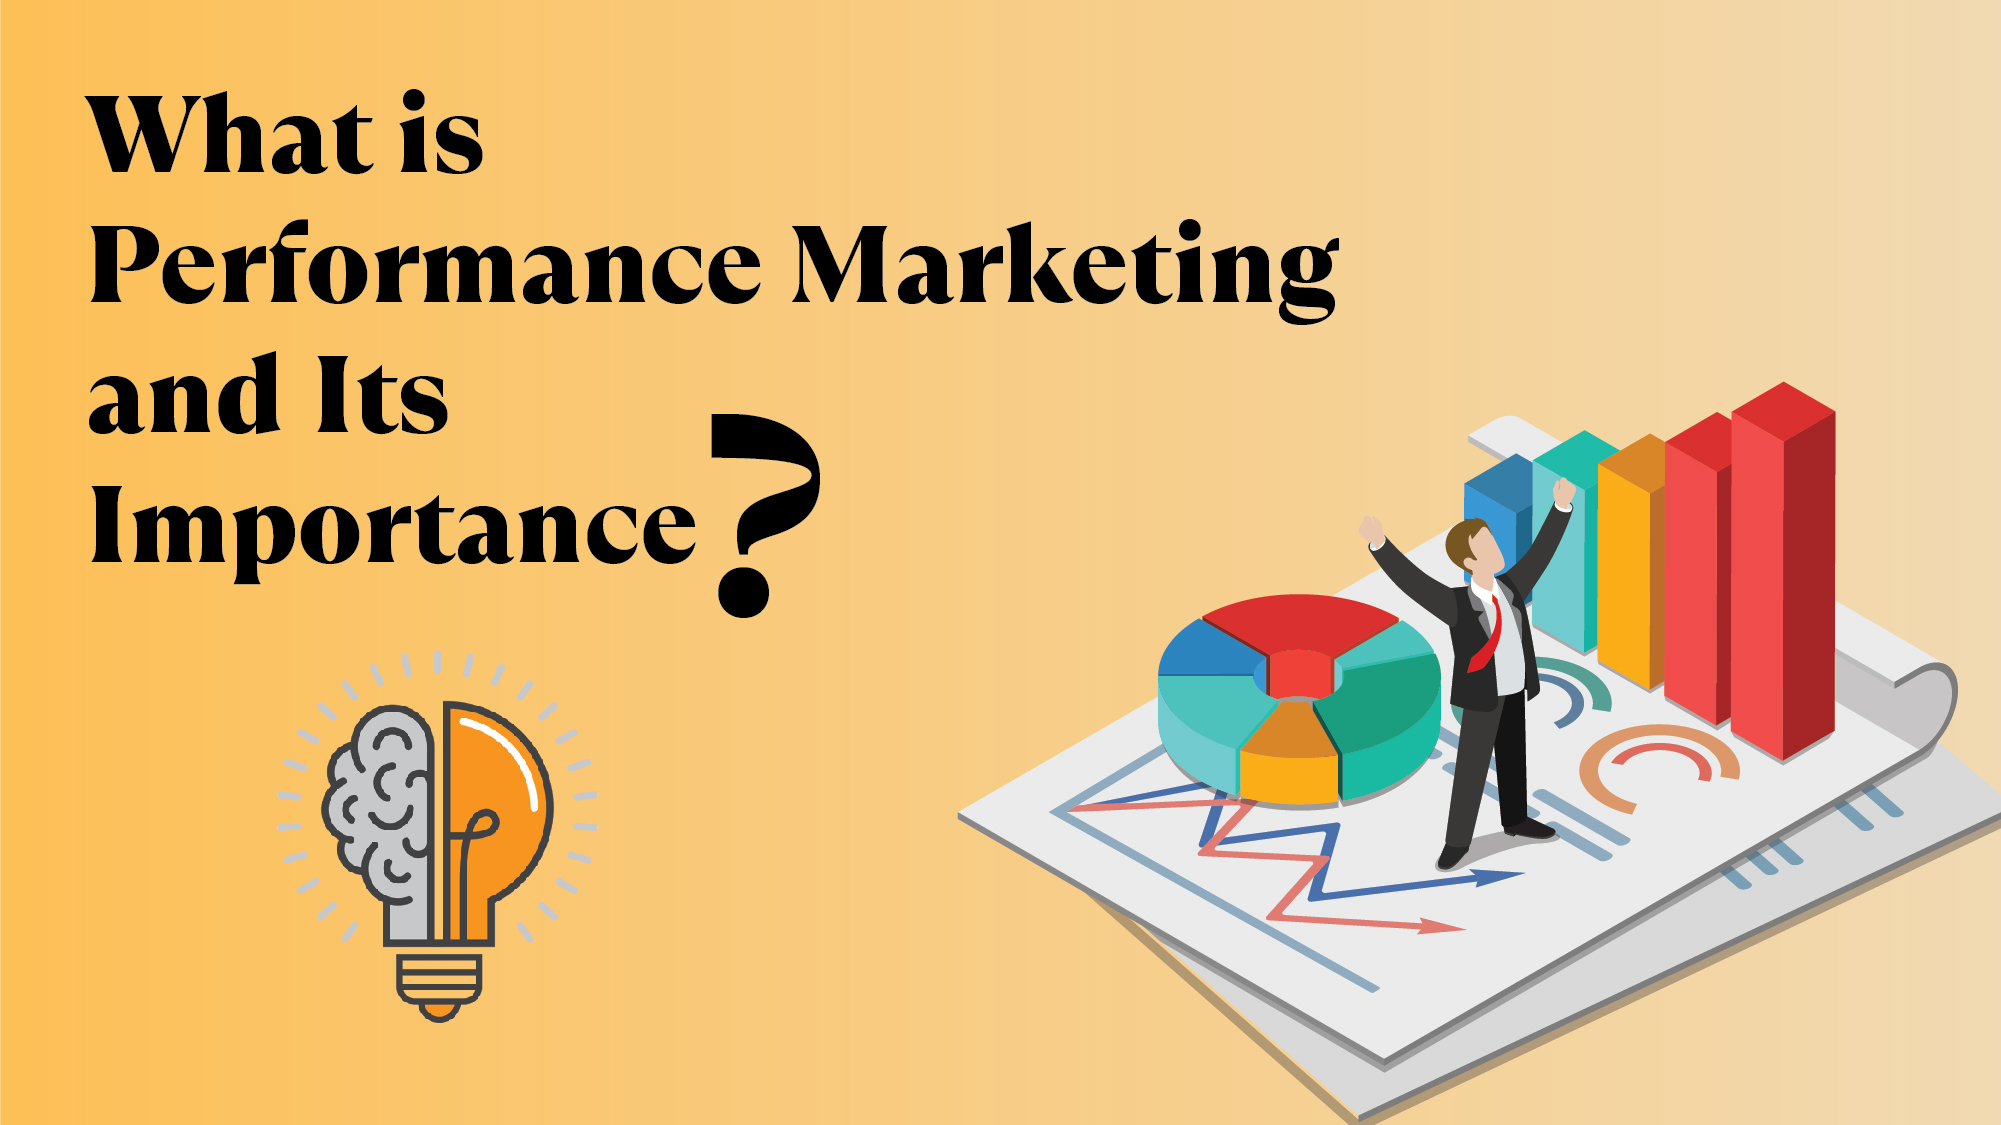 What is Performance Marketing and Its Importance?